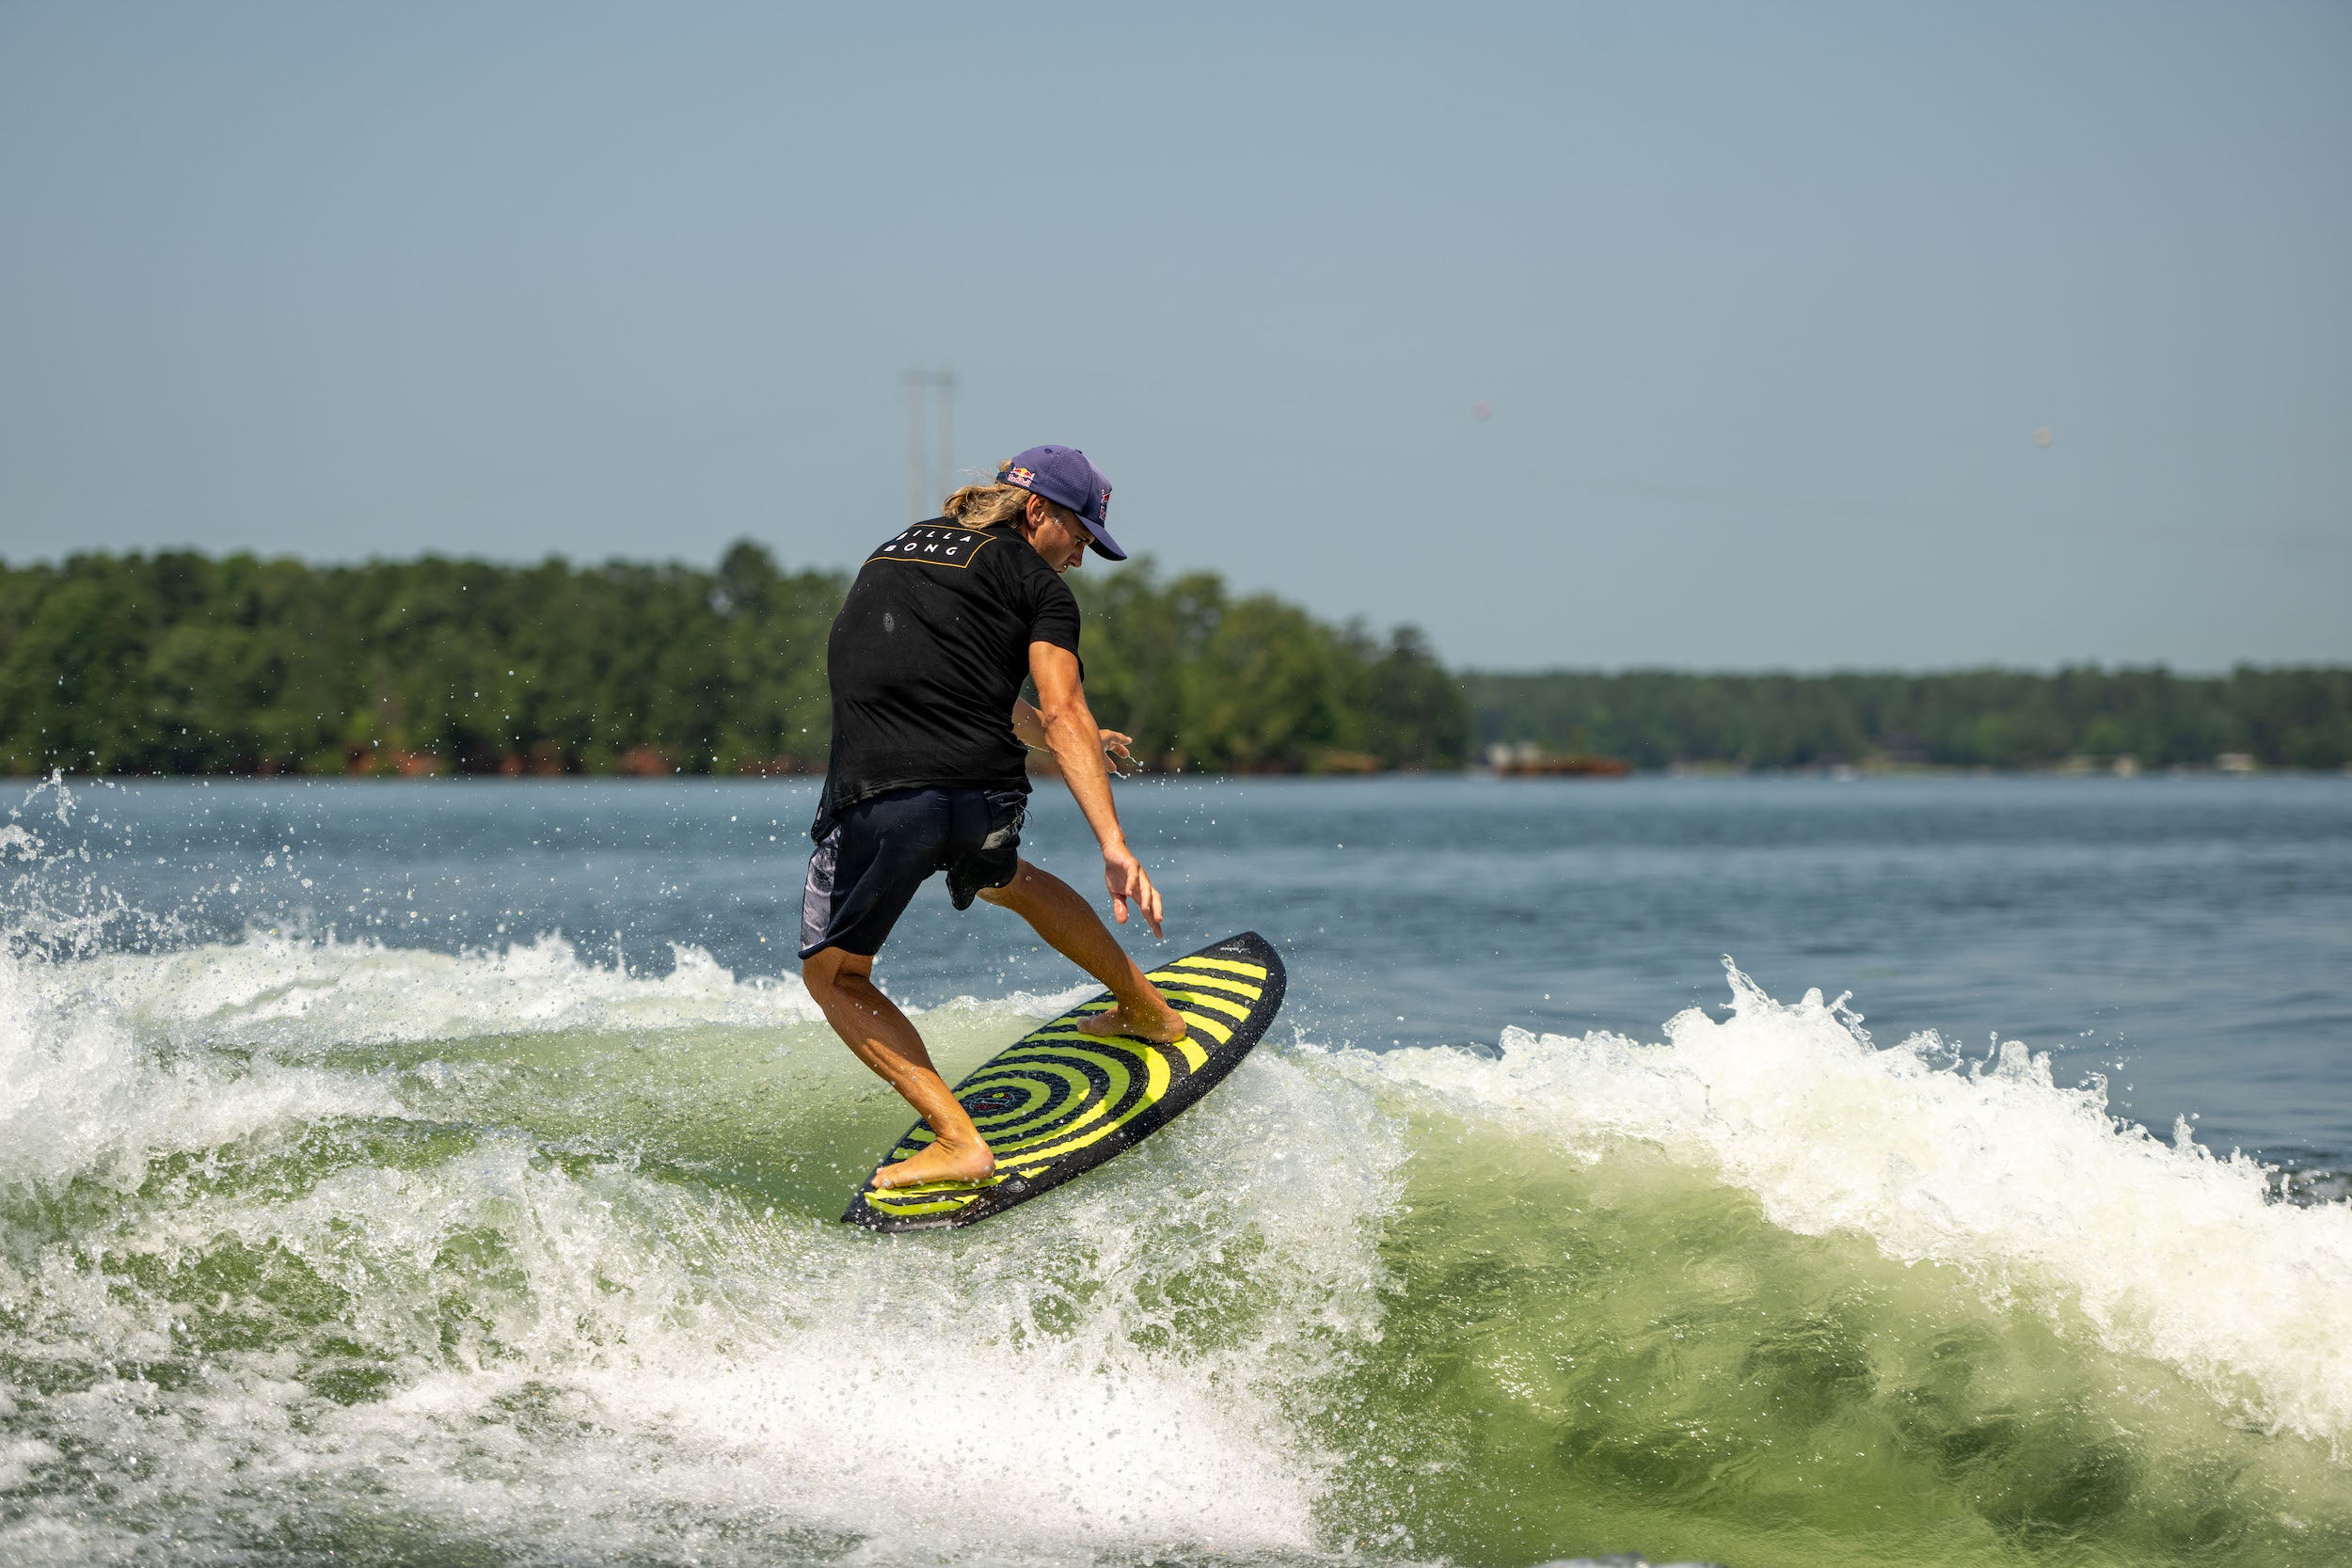 A Hyperlite 2024 Shim wakesurf enthusiast effortlessly rides a wave on a surfboard constructed with DuraShell technology.